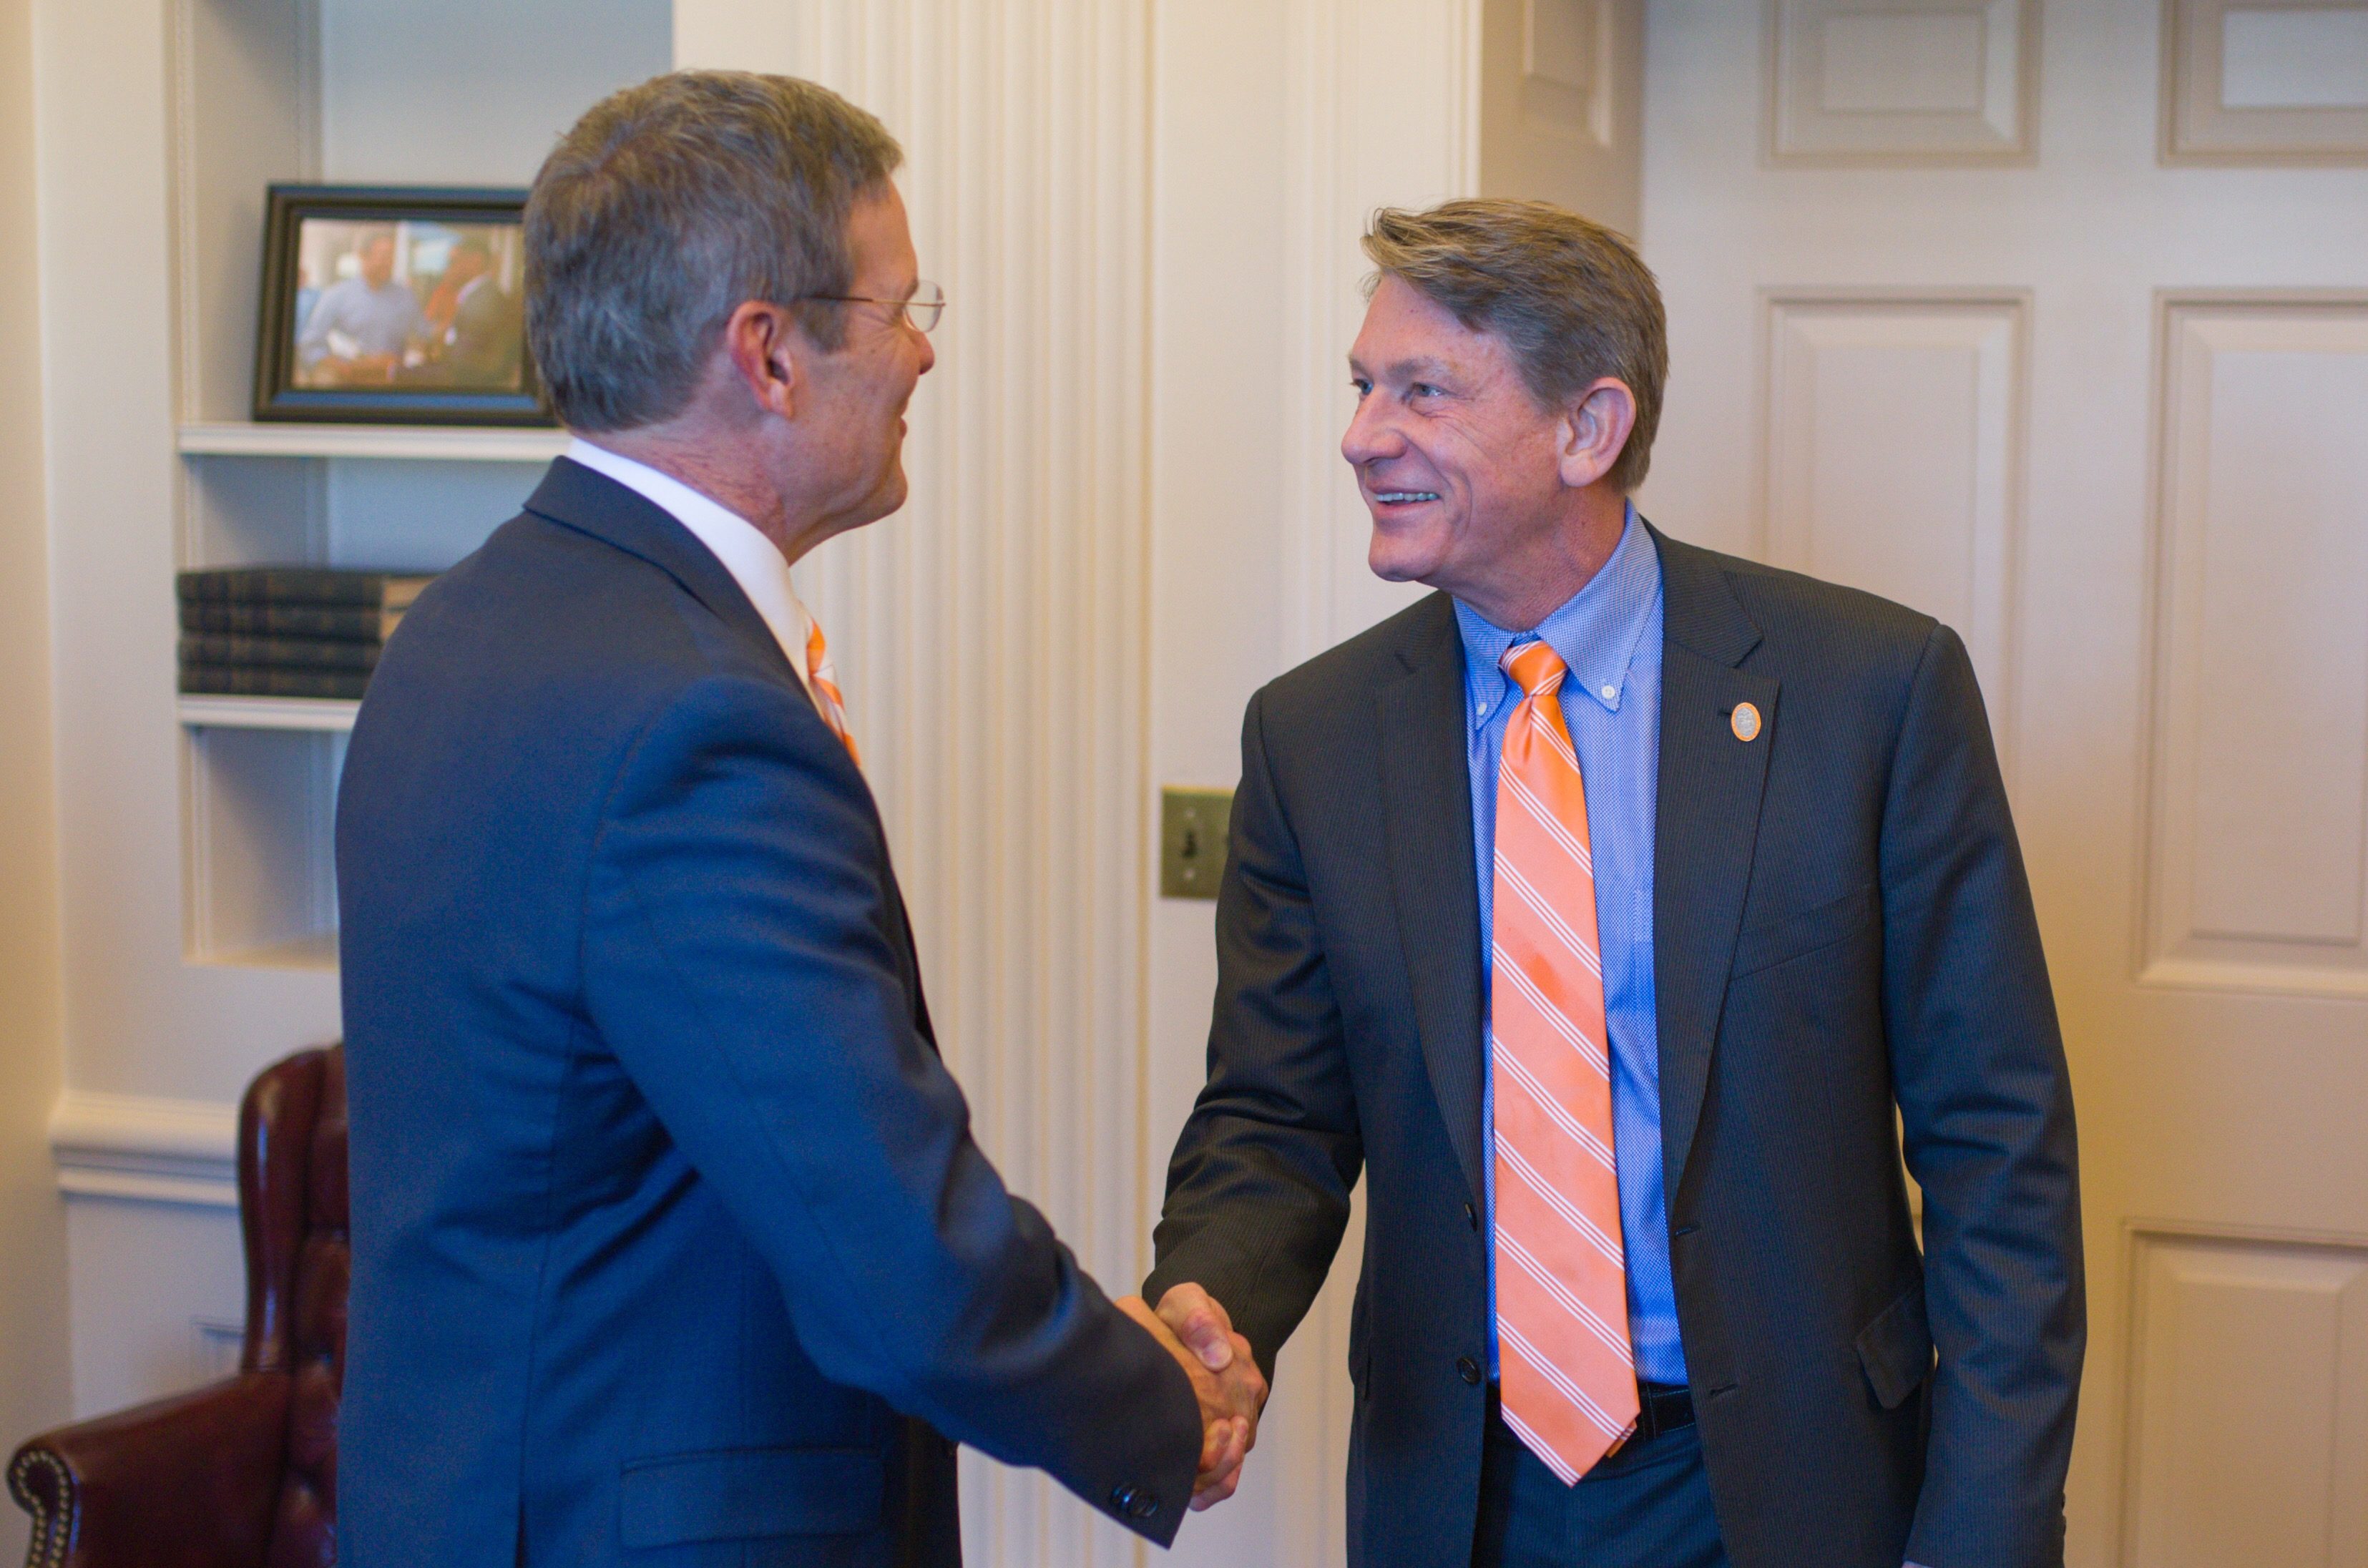 UT President Randy Boyd shaking hands with Governor Bill Lee